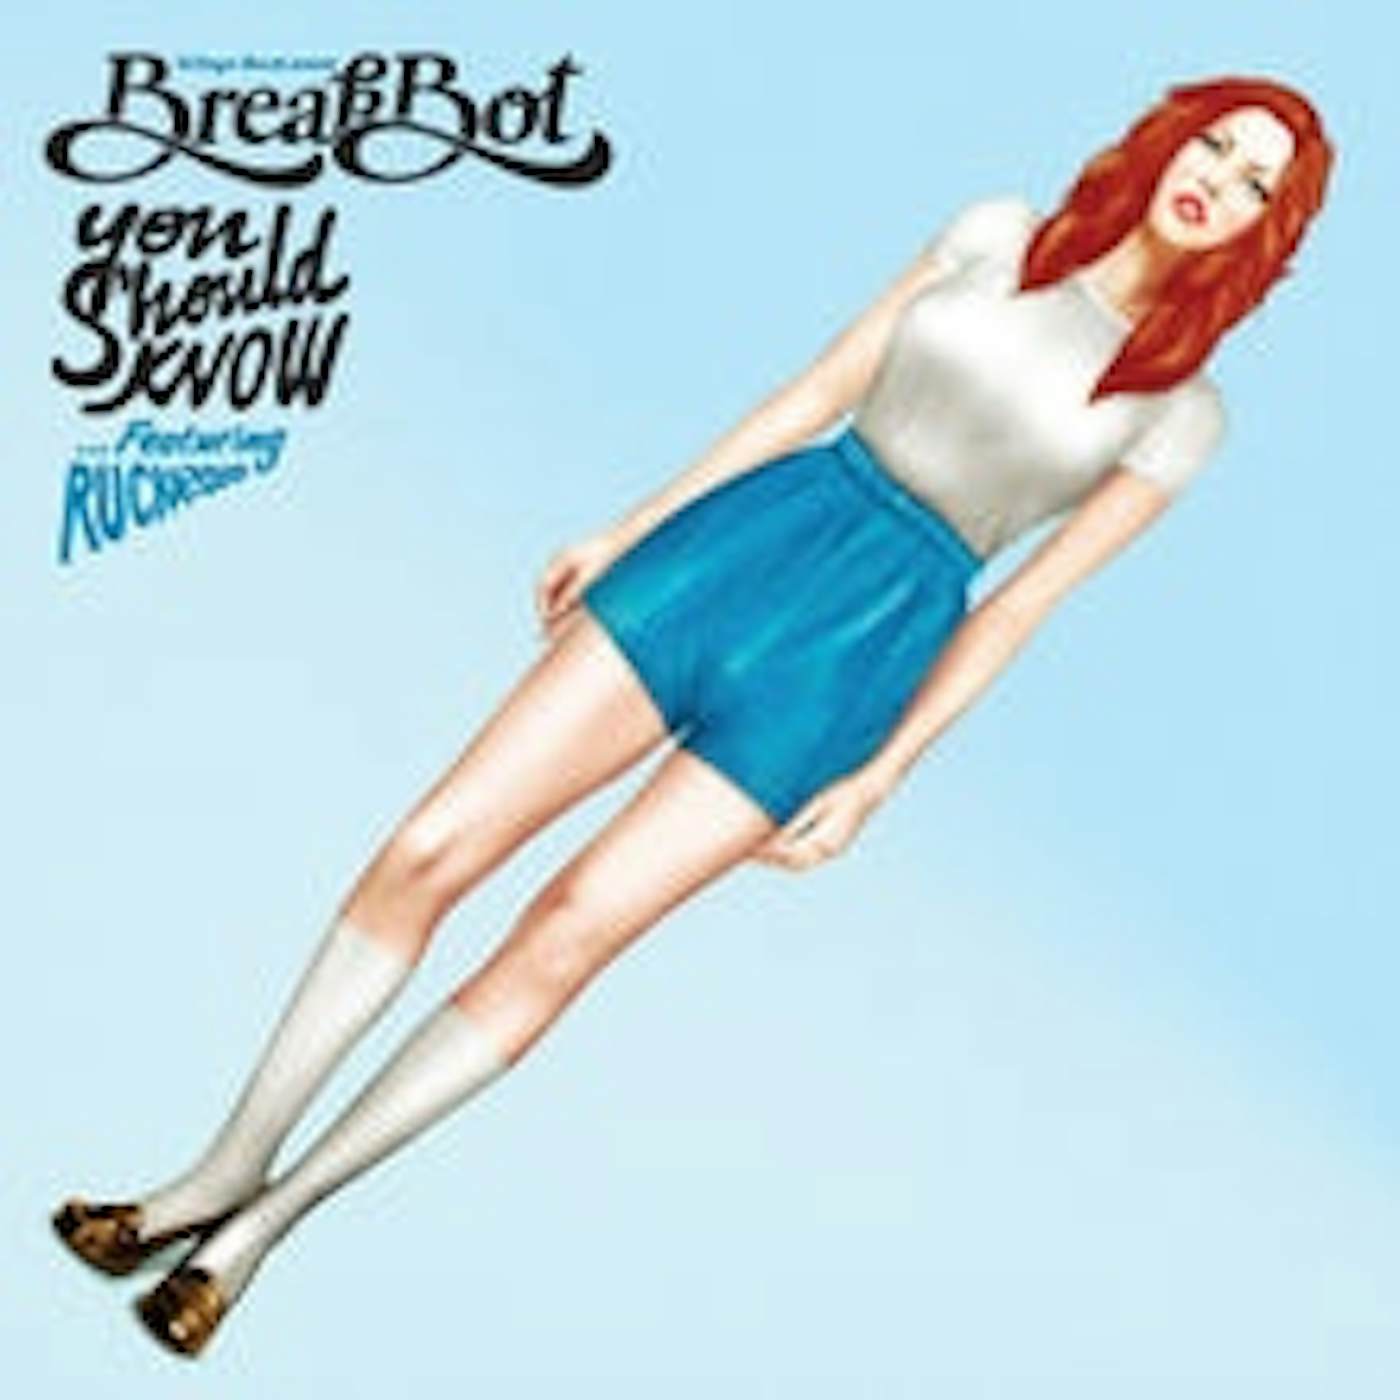 Breakbot You Should Know Vinyl Record